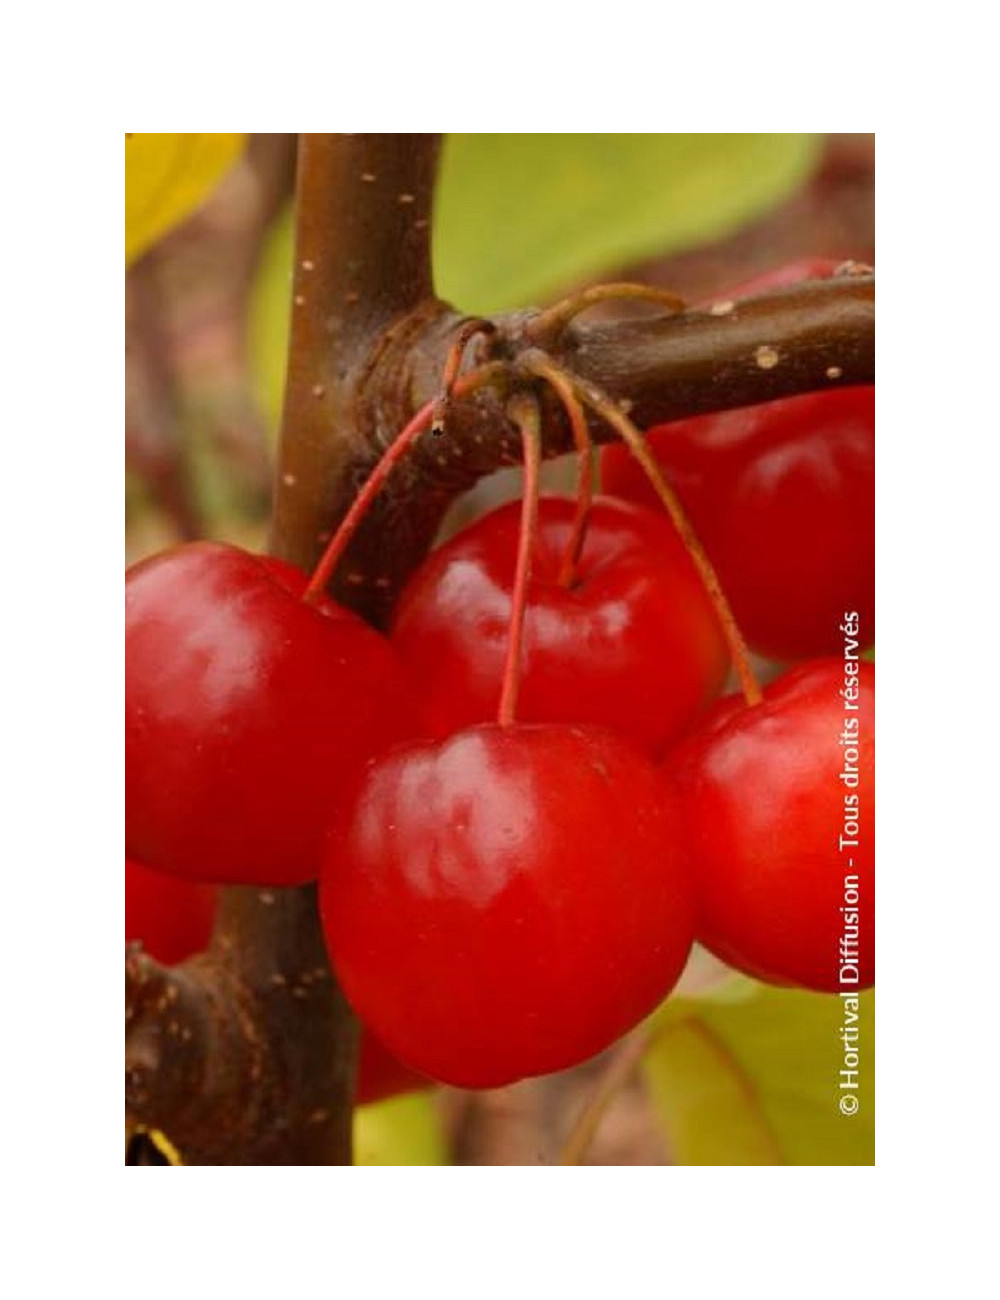 MALUS RED SENTINEL (Pommier d'ornement)3